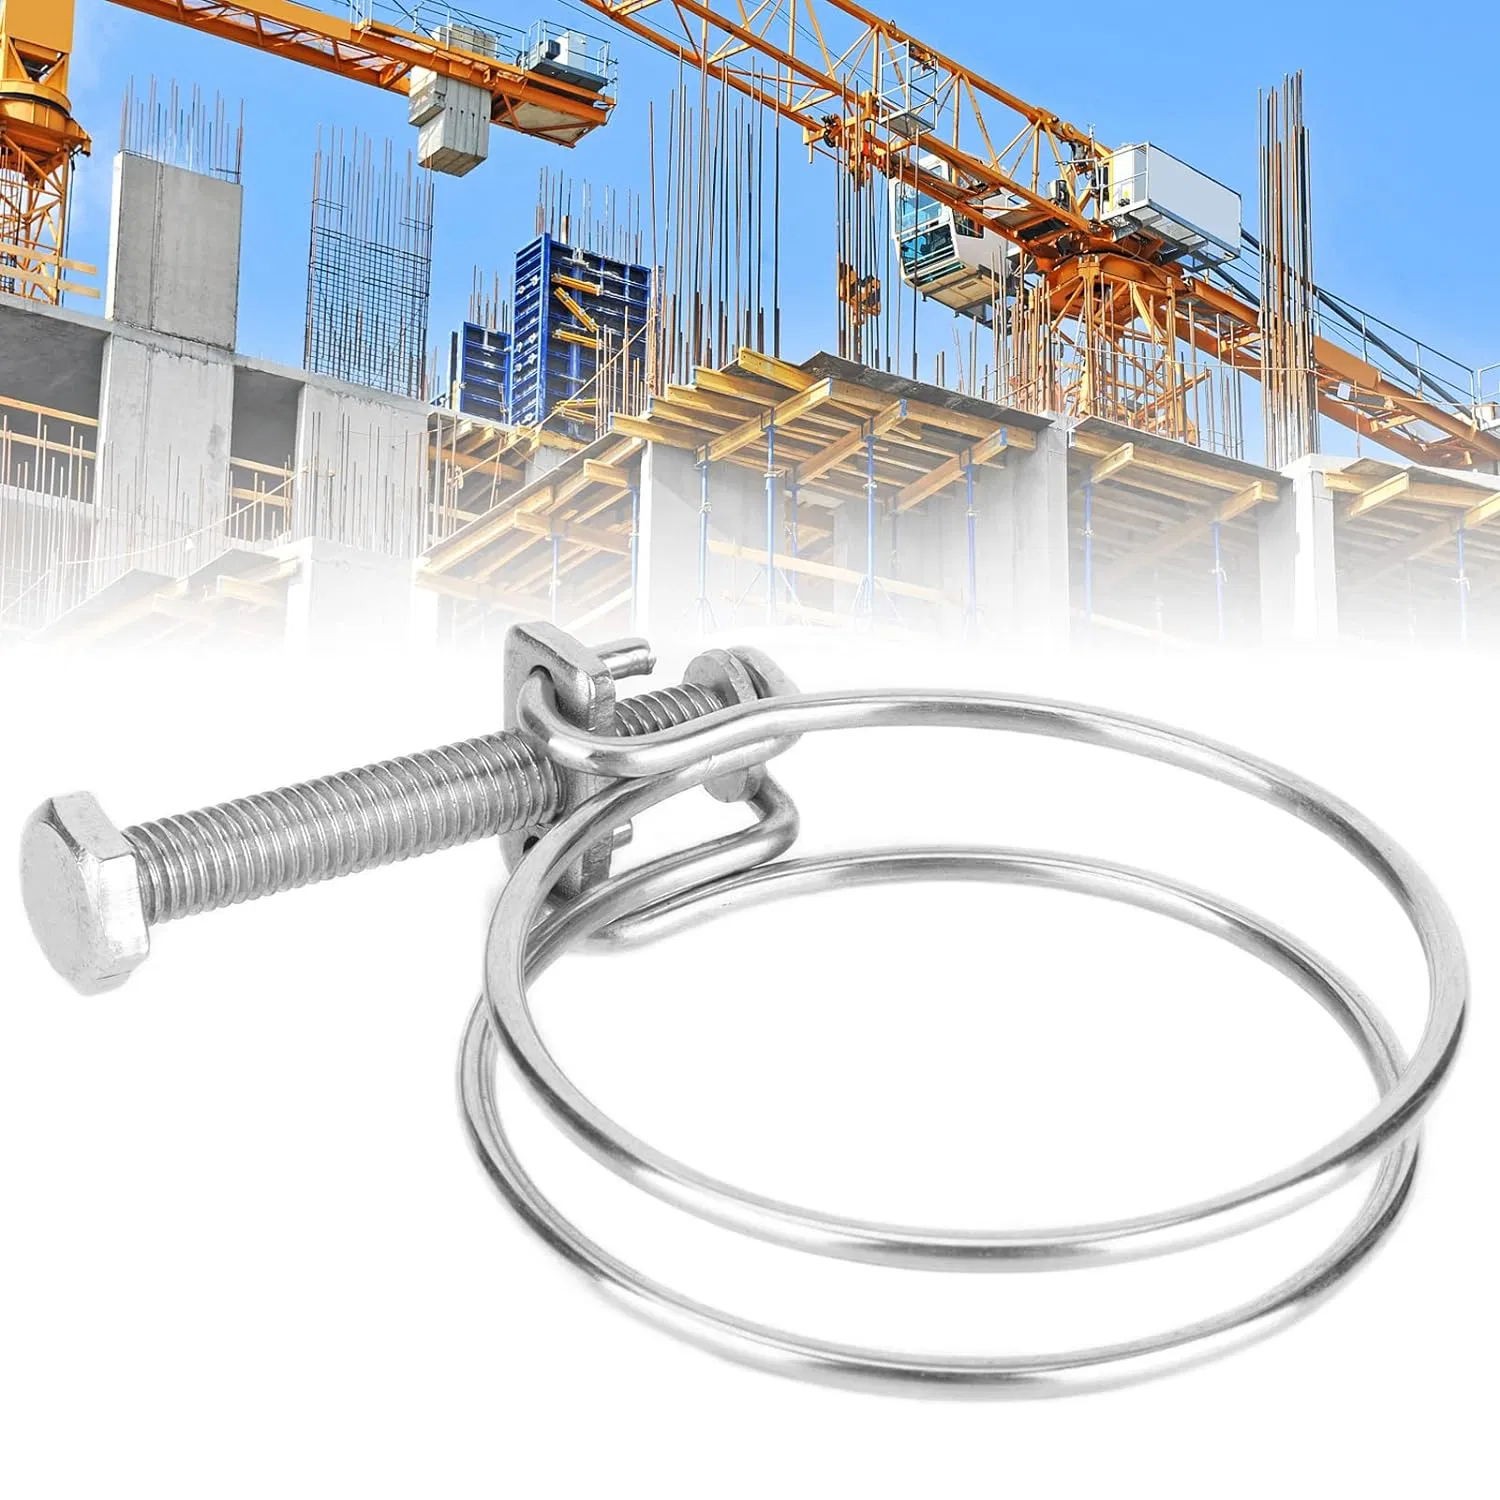 Factory Price Double Wire Clip Hose Clamp 304 Stainless Steel Pipe Clamps Adjustable 10-45mm